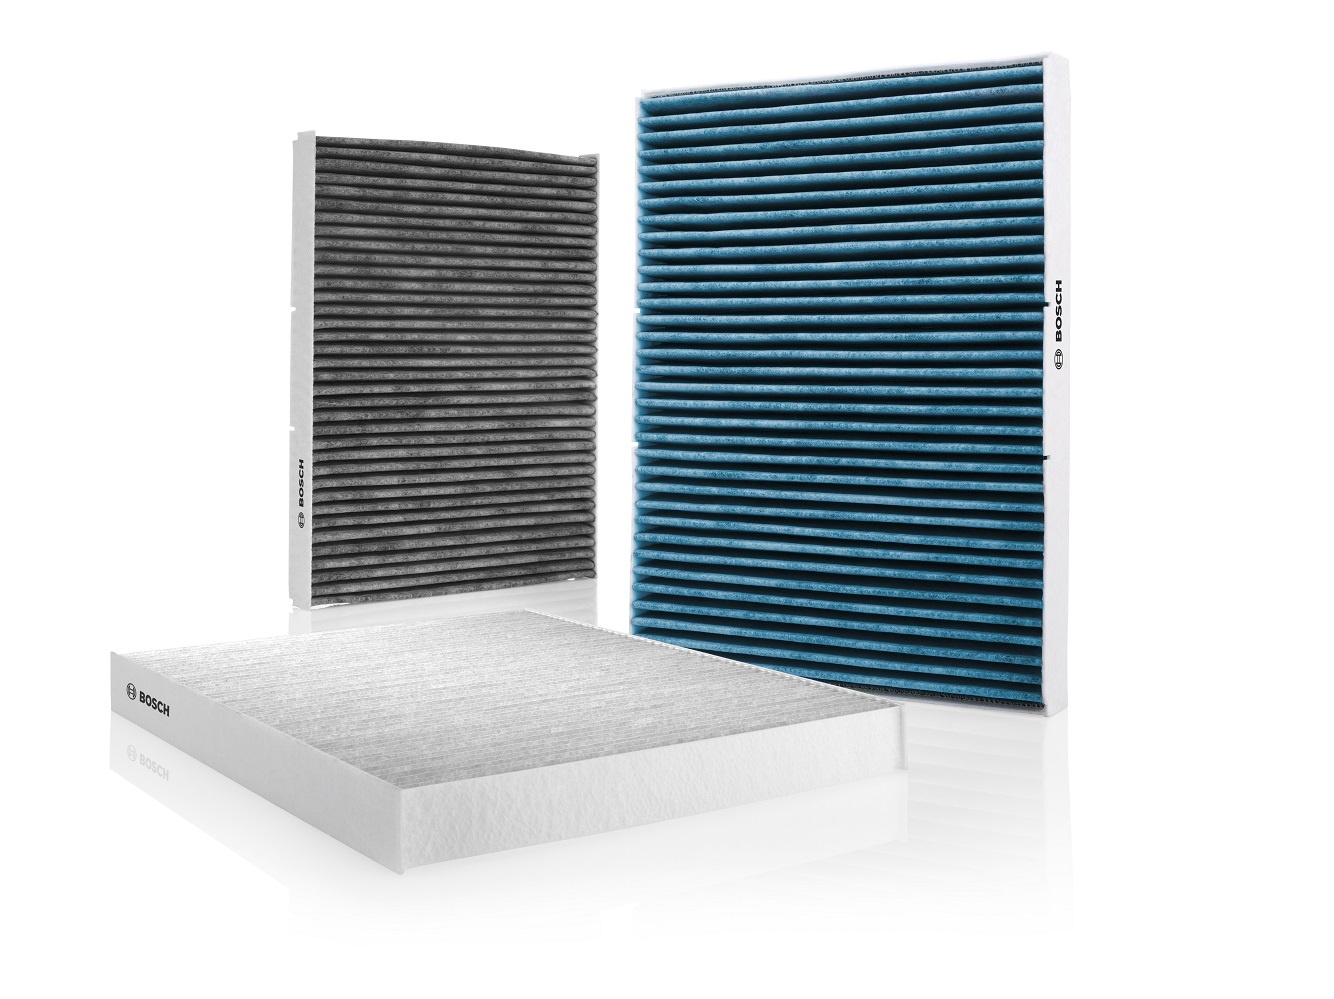 Broad range of Bosch cabin filters for electric vehicles